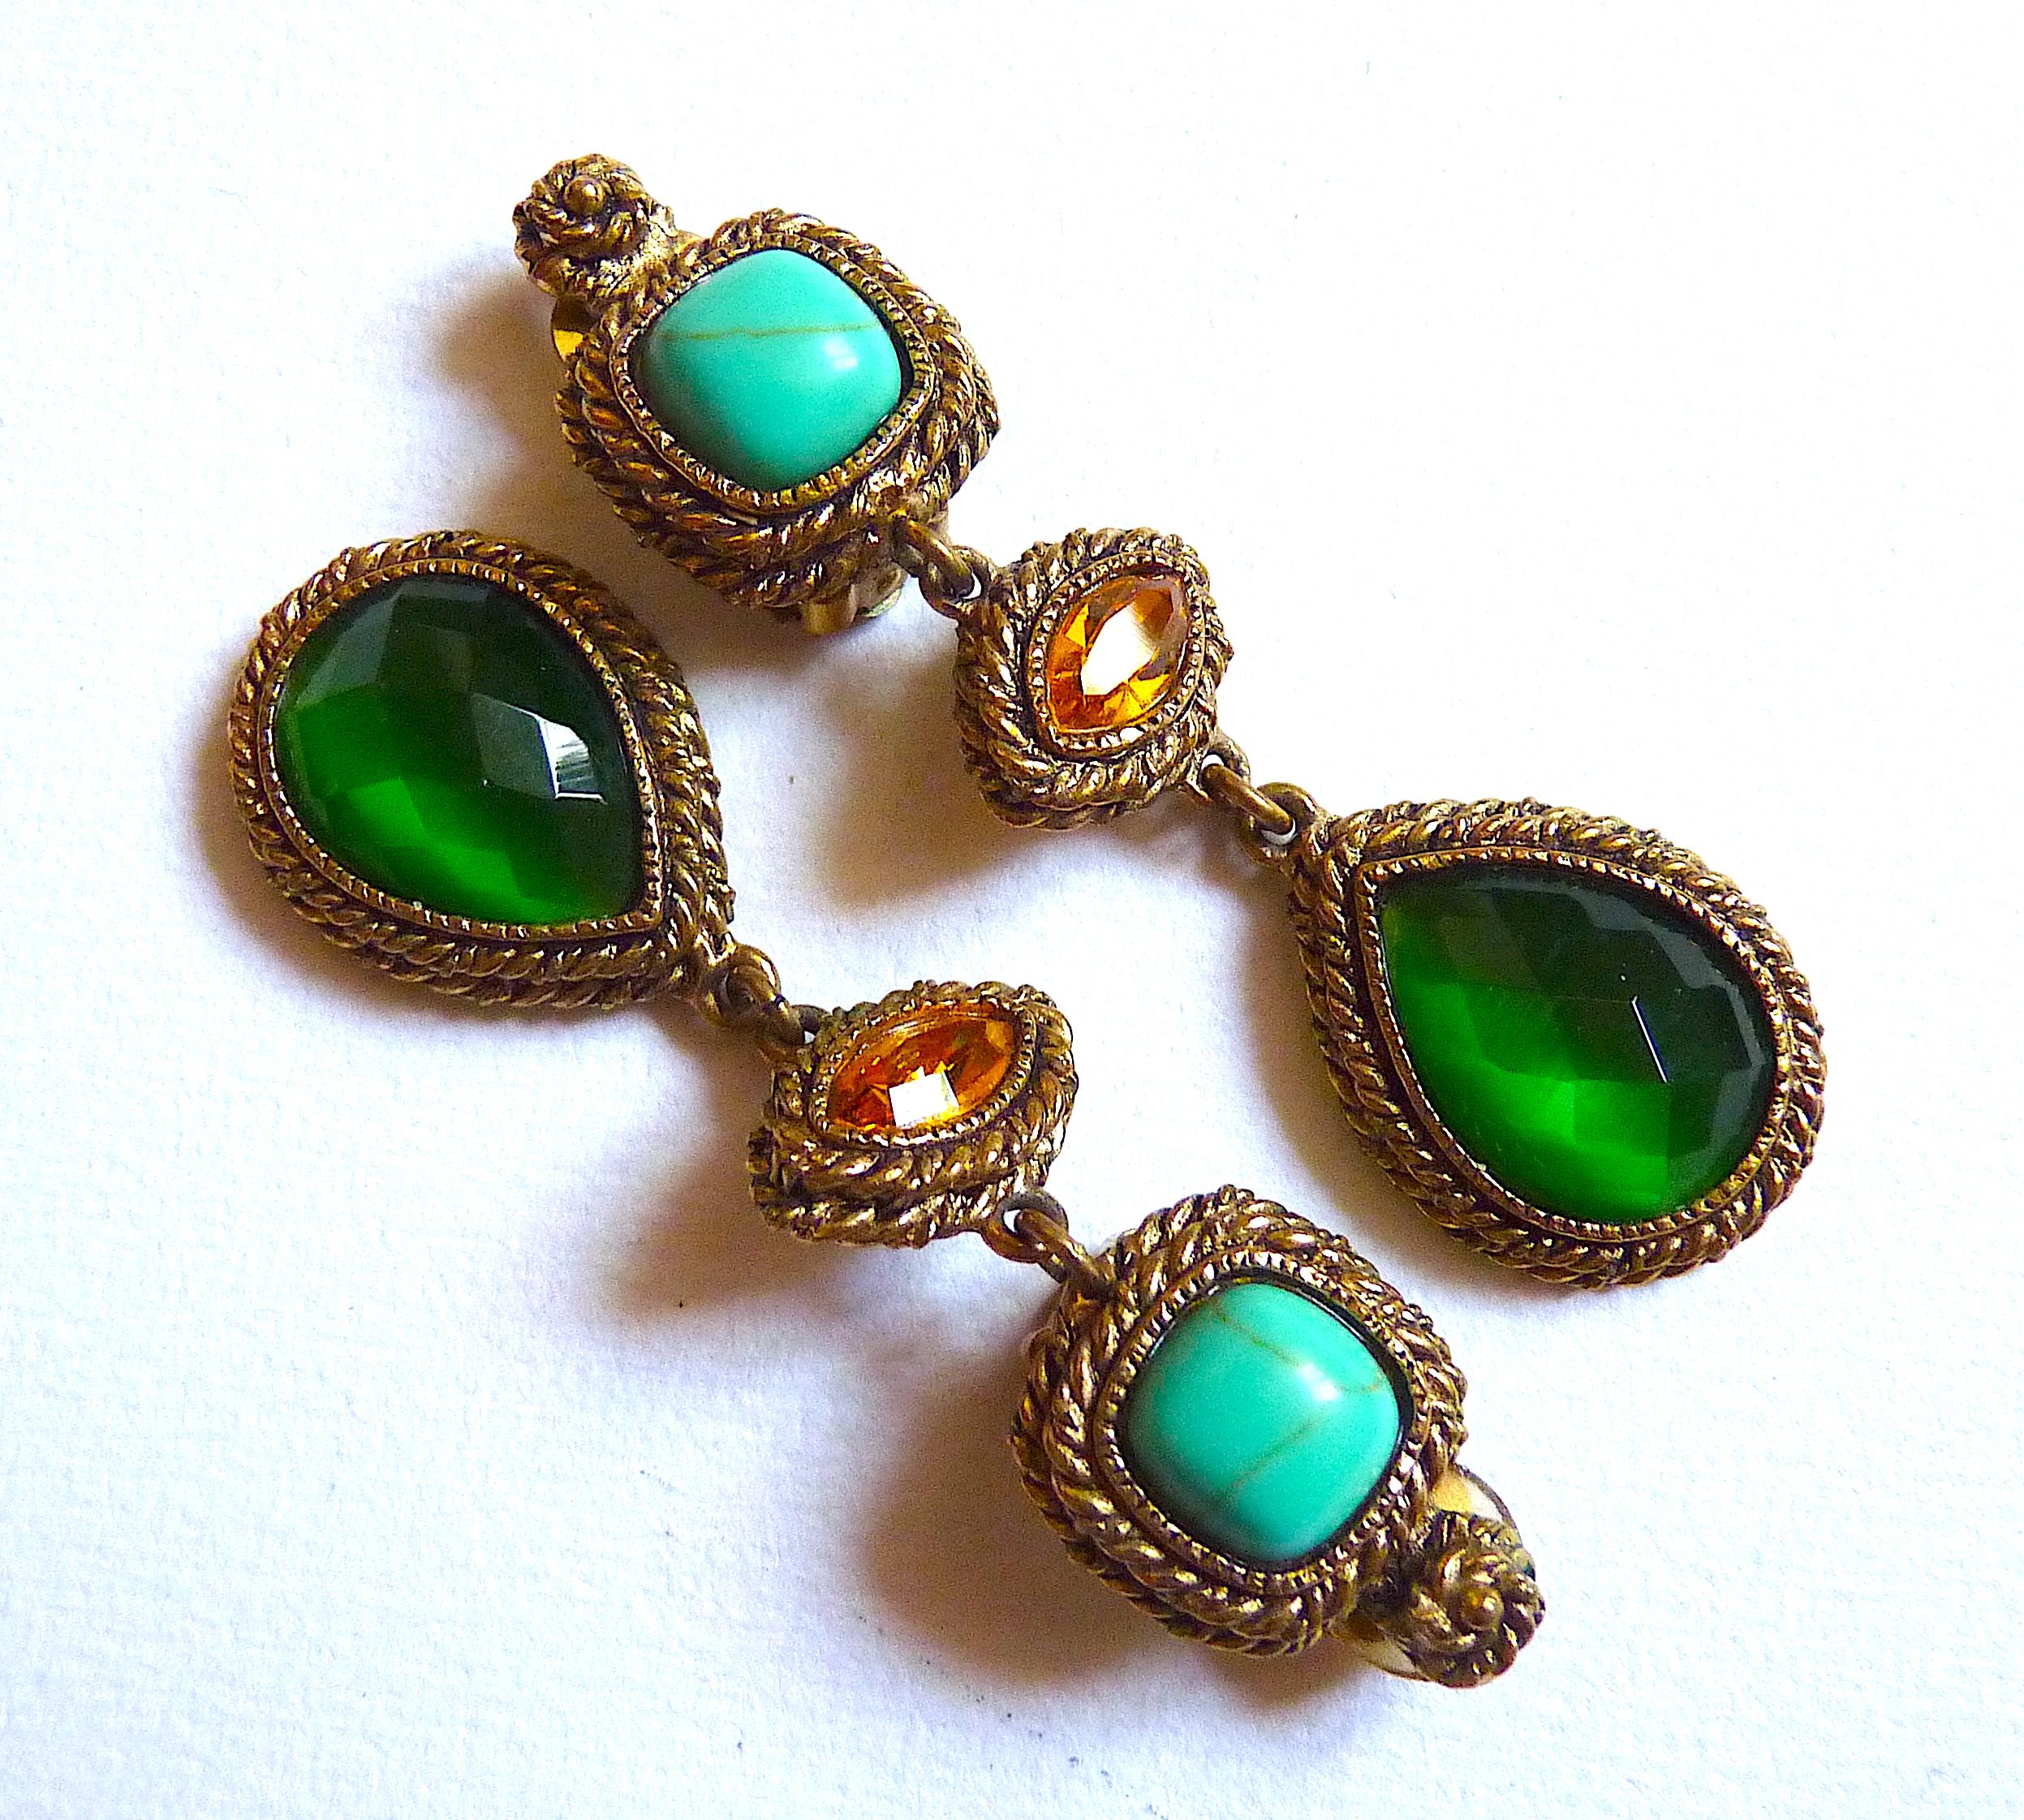 Long Poggi Paris Pendants, Vintage from the 80's, with a turquoise poured glass cabochon on the clip and a large green glass crystal on the pendant.

Signed POGGI PARIS at back of 1 clip

CONDITION : Very nice vintage condition

Measurements :